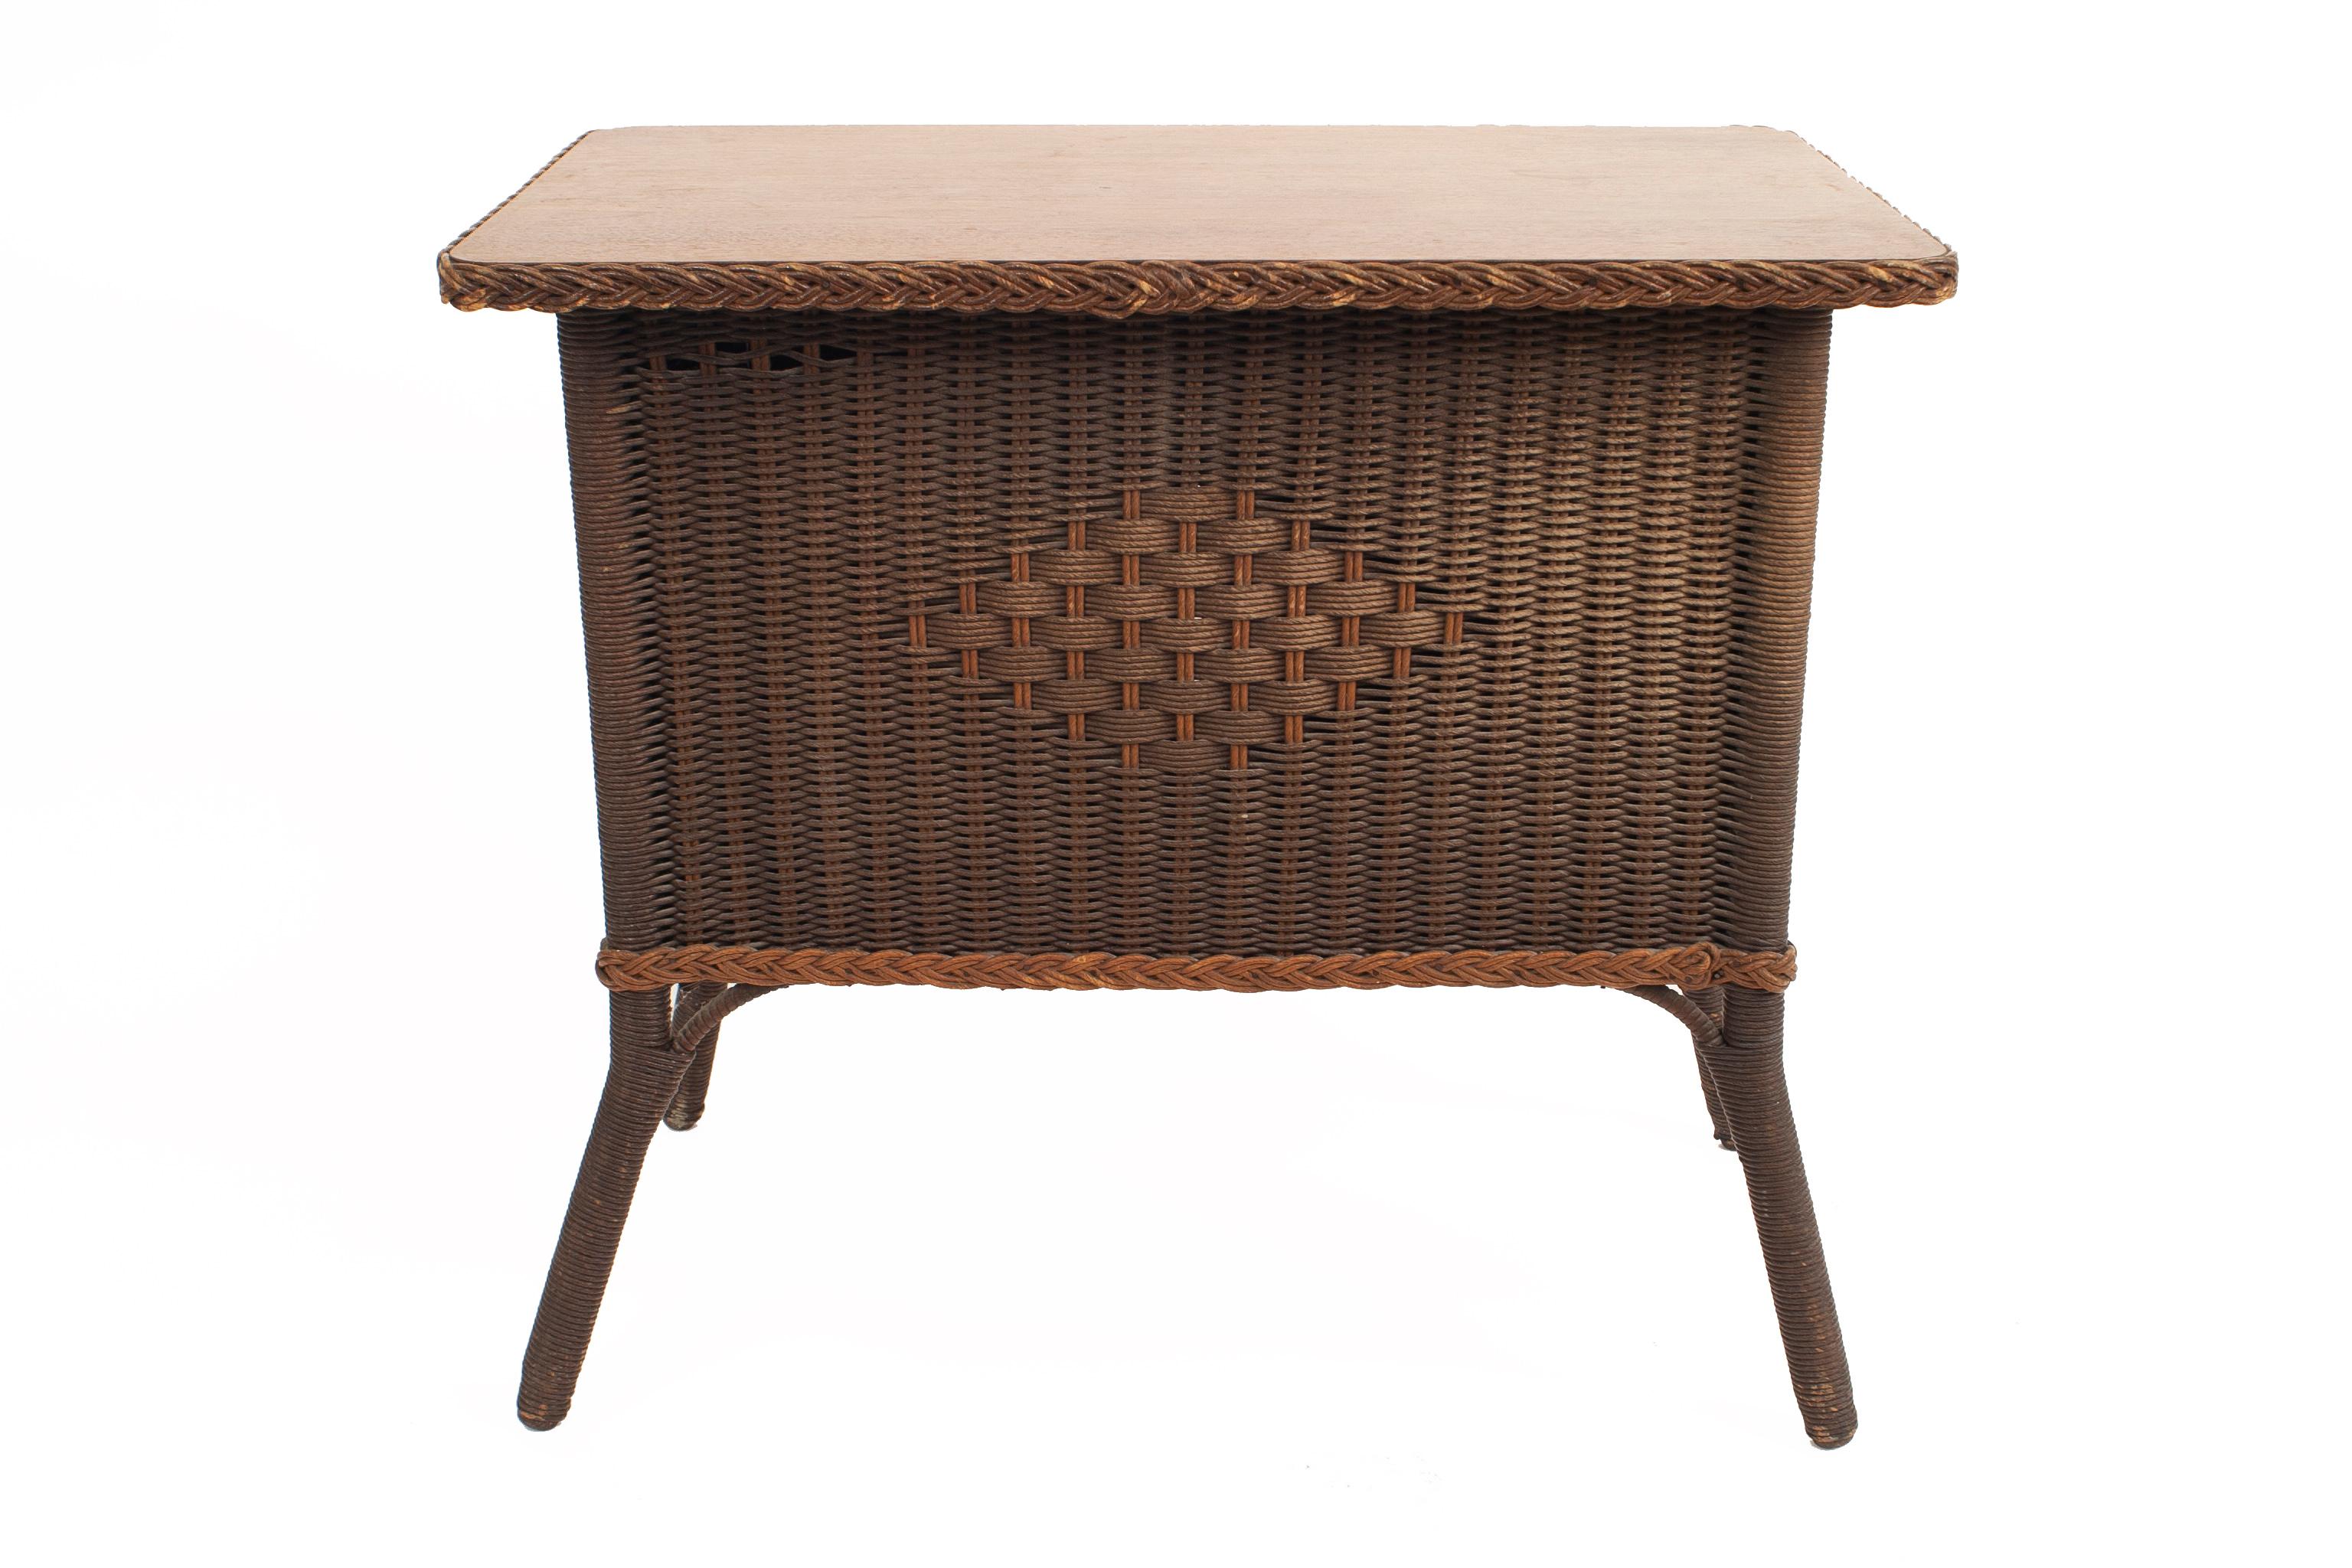 American wicker (fiber) Mission style (second quarter of the 20th century) small rectangular commode with 2 doors and an oak top (sheboygen fiber furniture label).